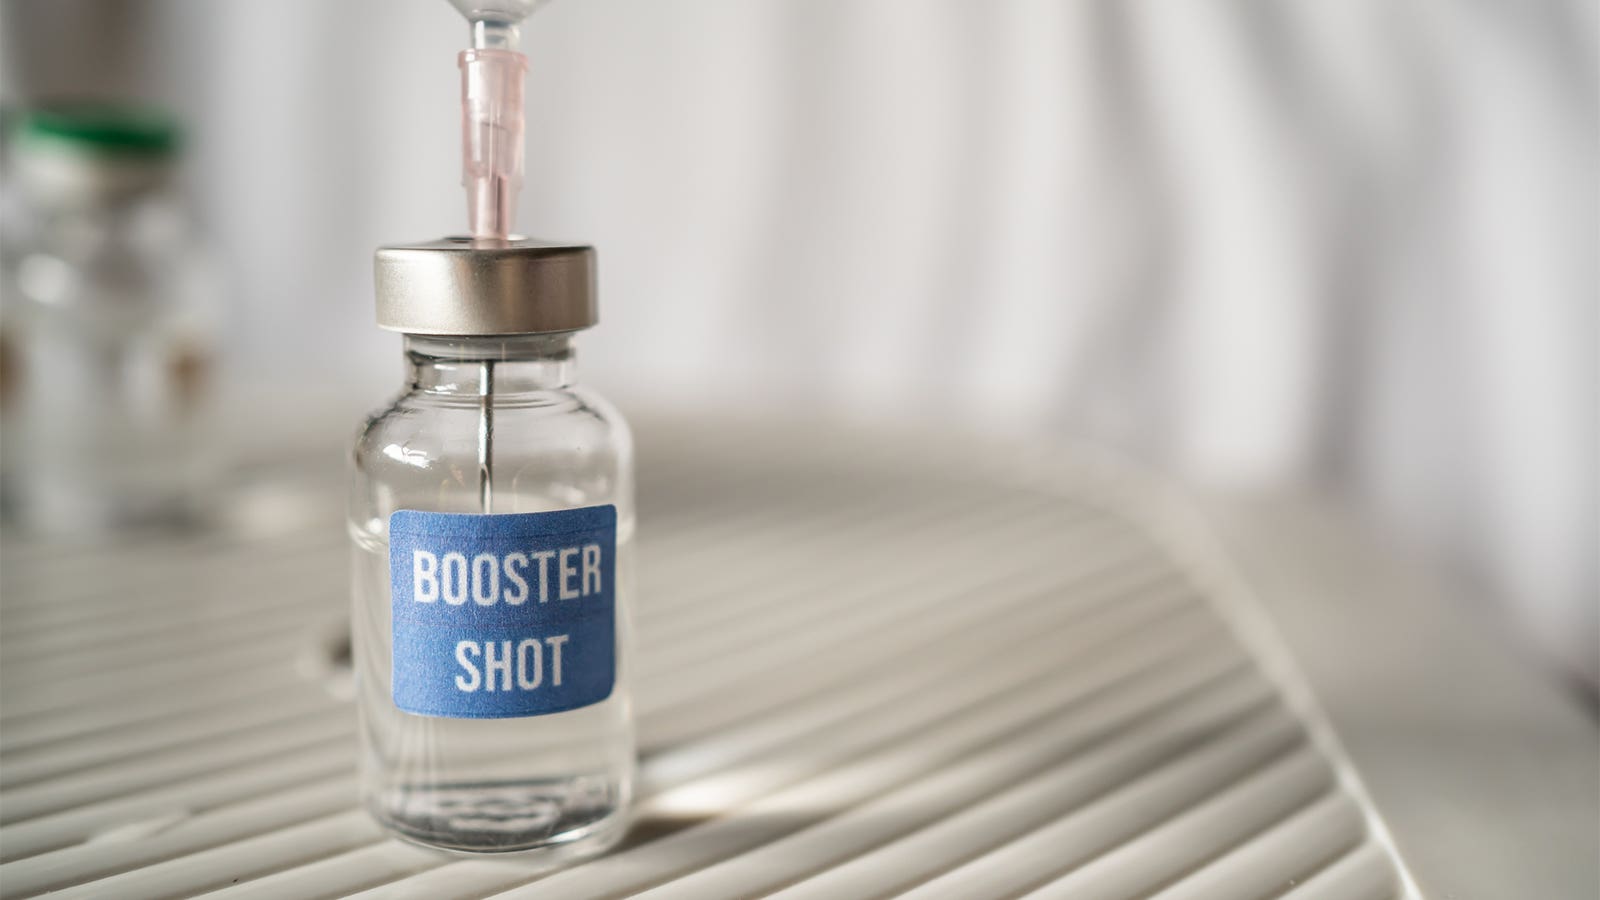 Booster dose able to reduce Covid-19 infection rates